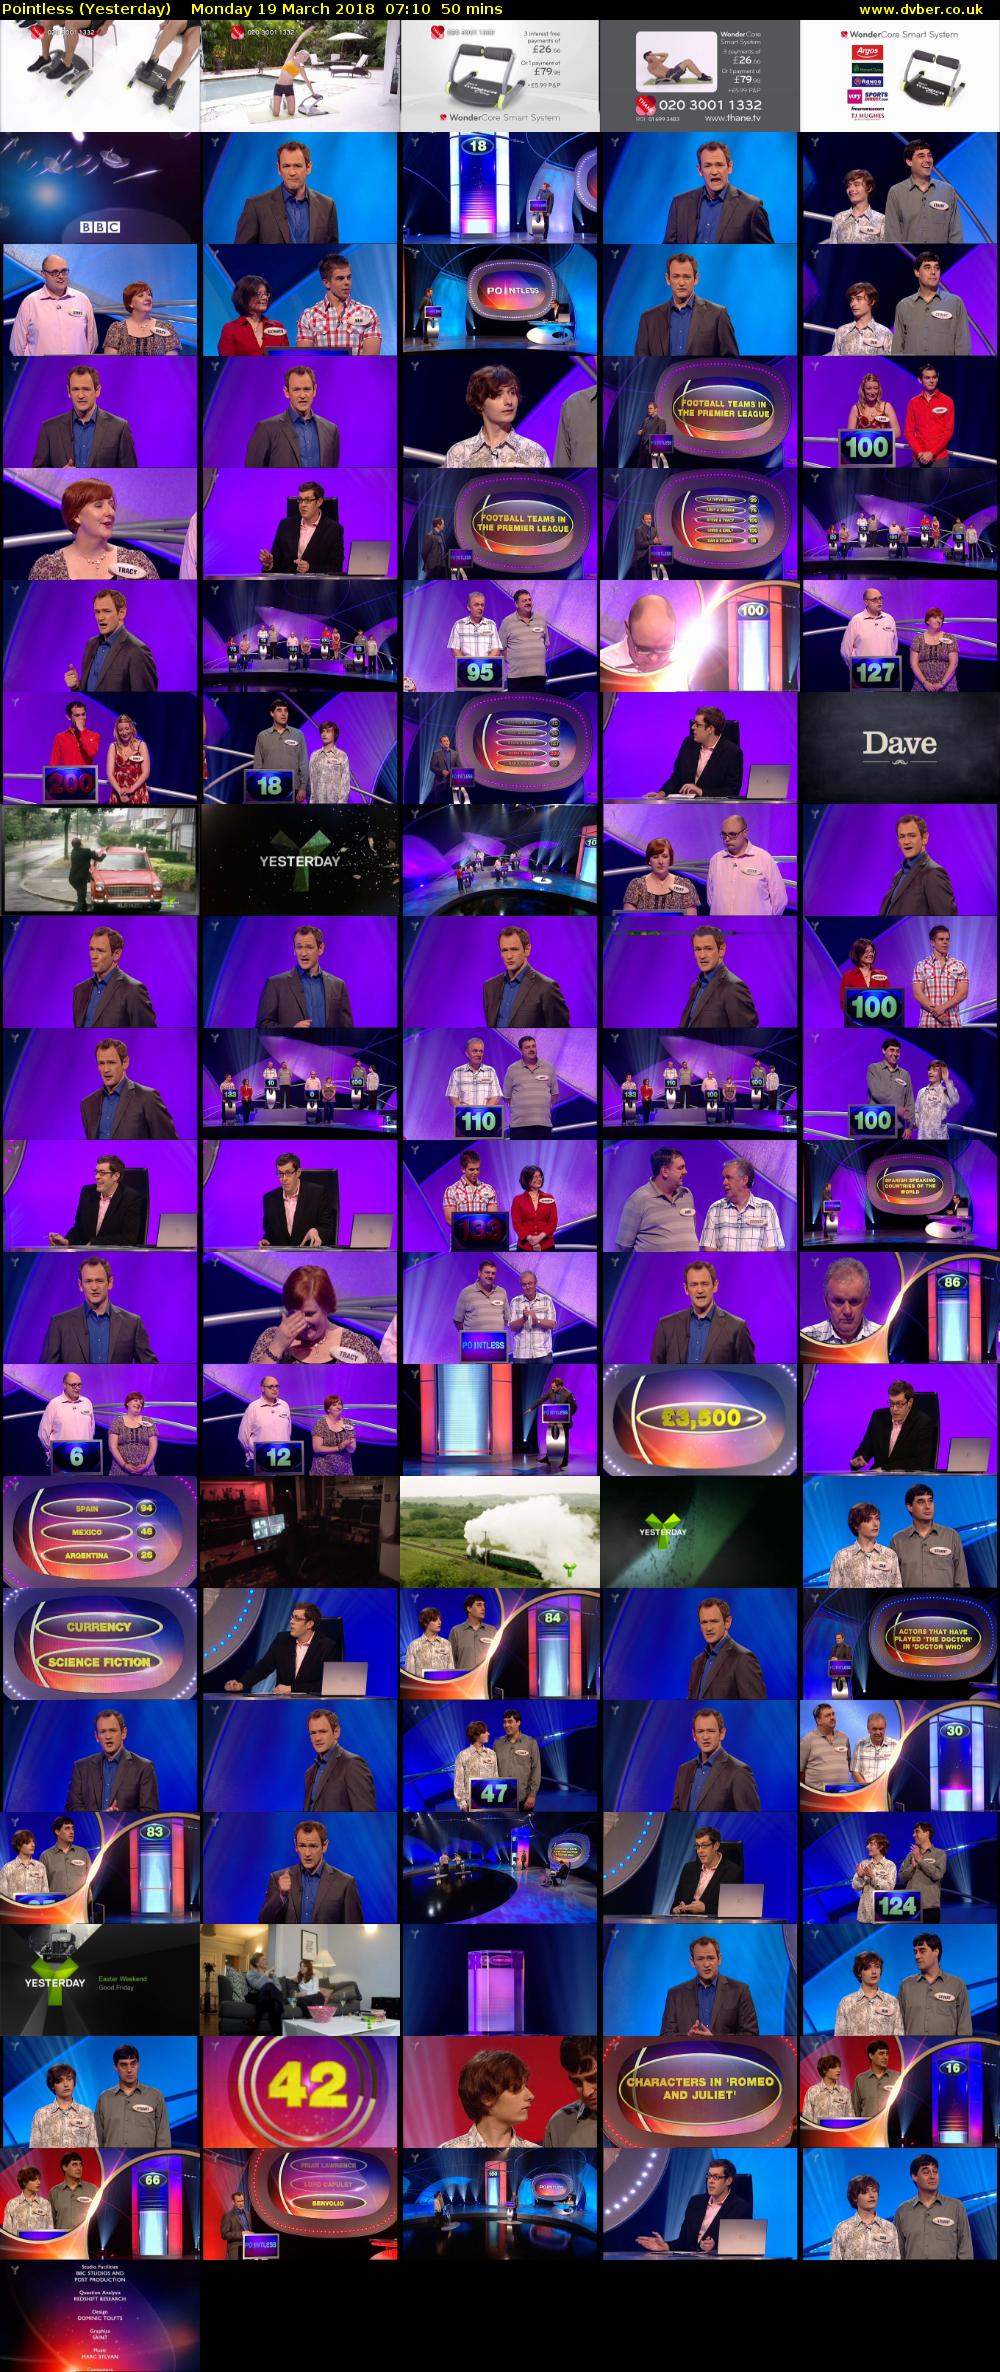 Pointless (Yesterday) Monday 19 March 2018 07:10 - 08:00